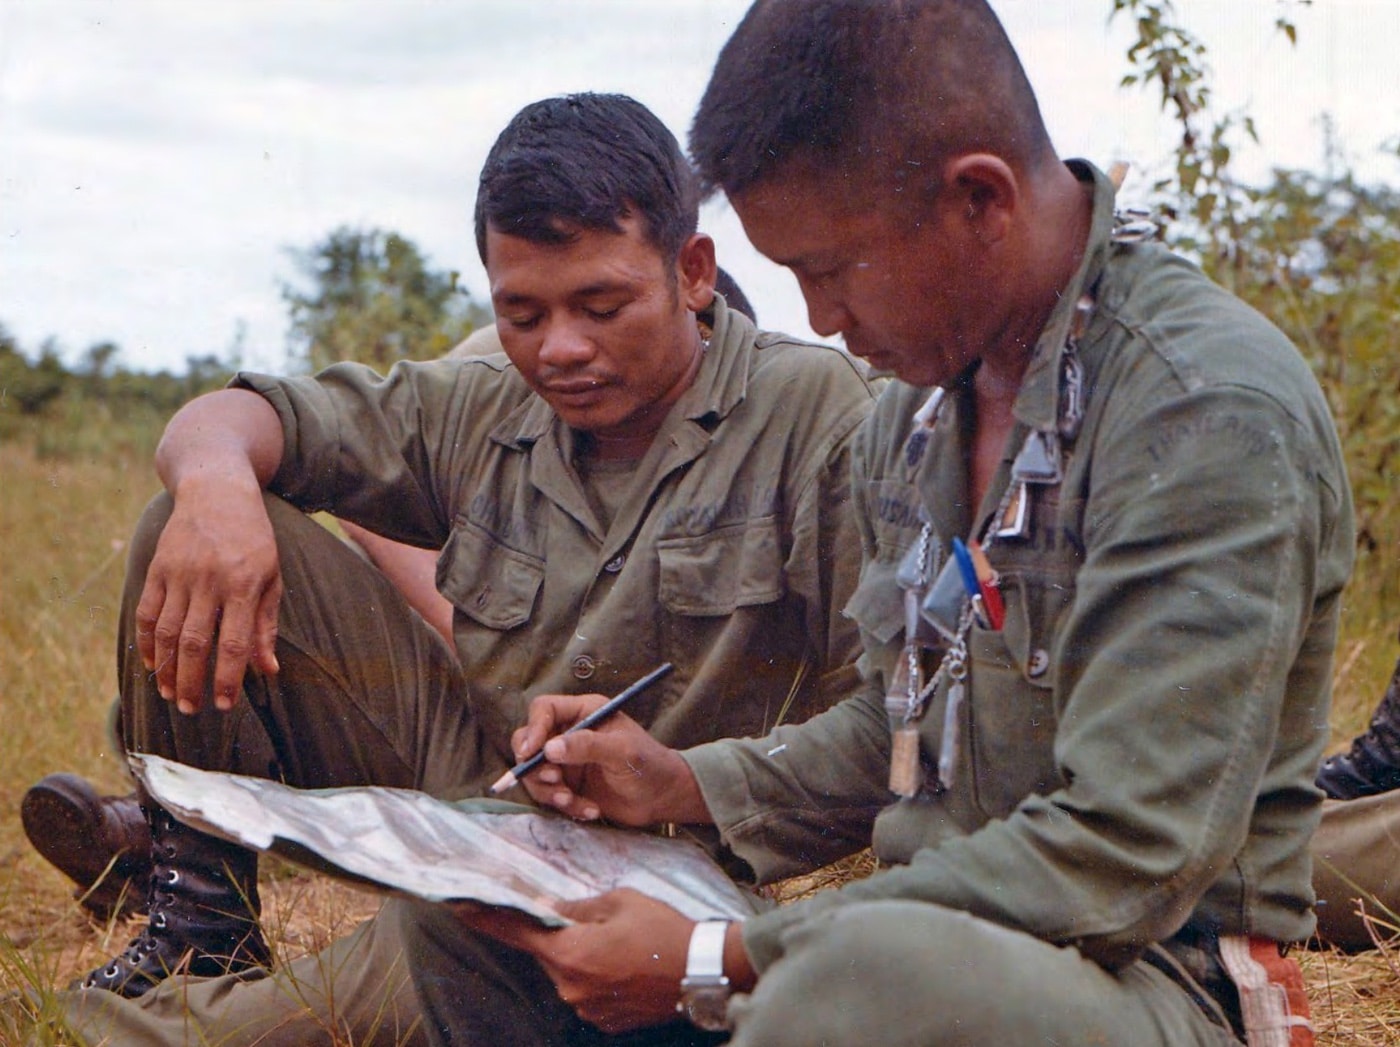 This image shows a Thai lieutenant and one of his soldiers planning a patrol southeast of Saigon. Thailand's involvement in Vietnam was an easy one to understand. They were neighbors to the country and wanted to stop the march of communist totalitarianism through Indochina.